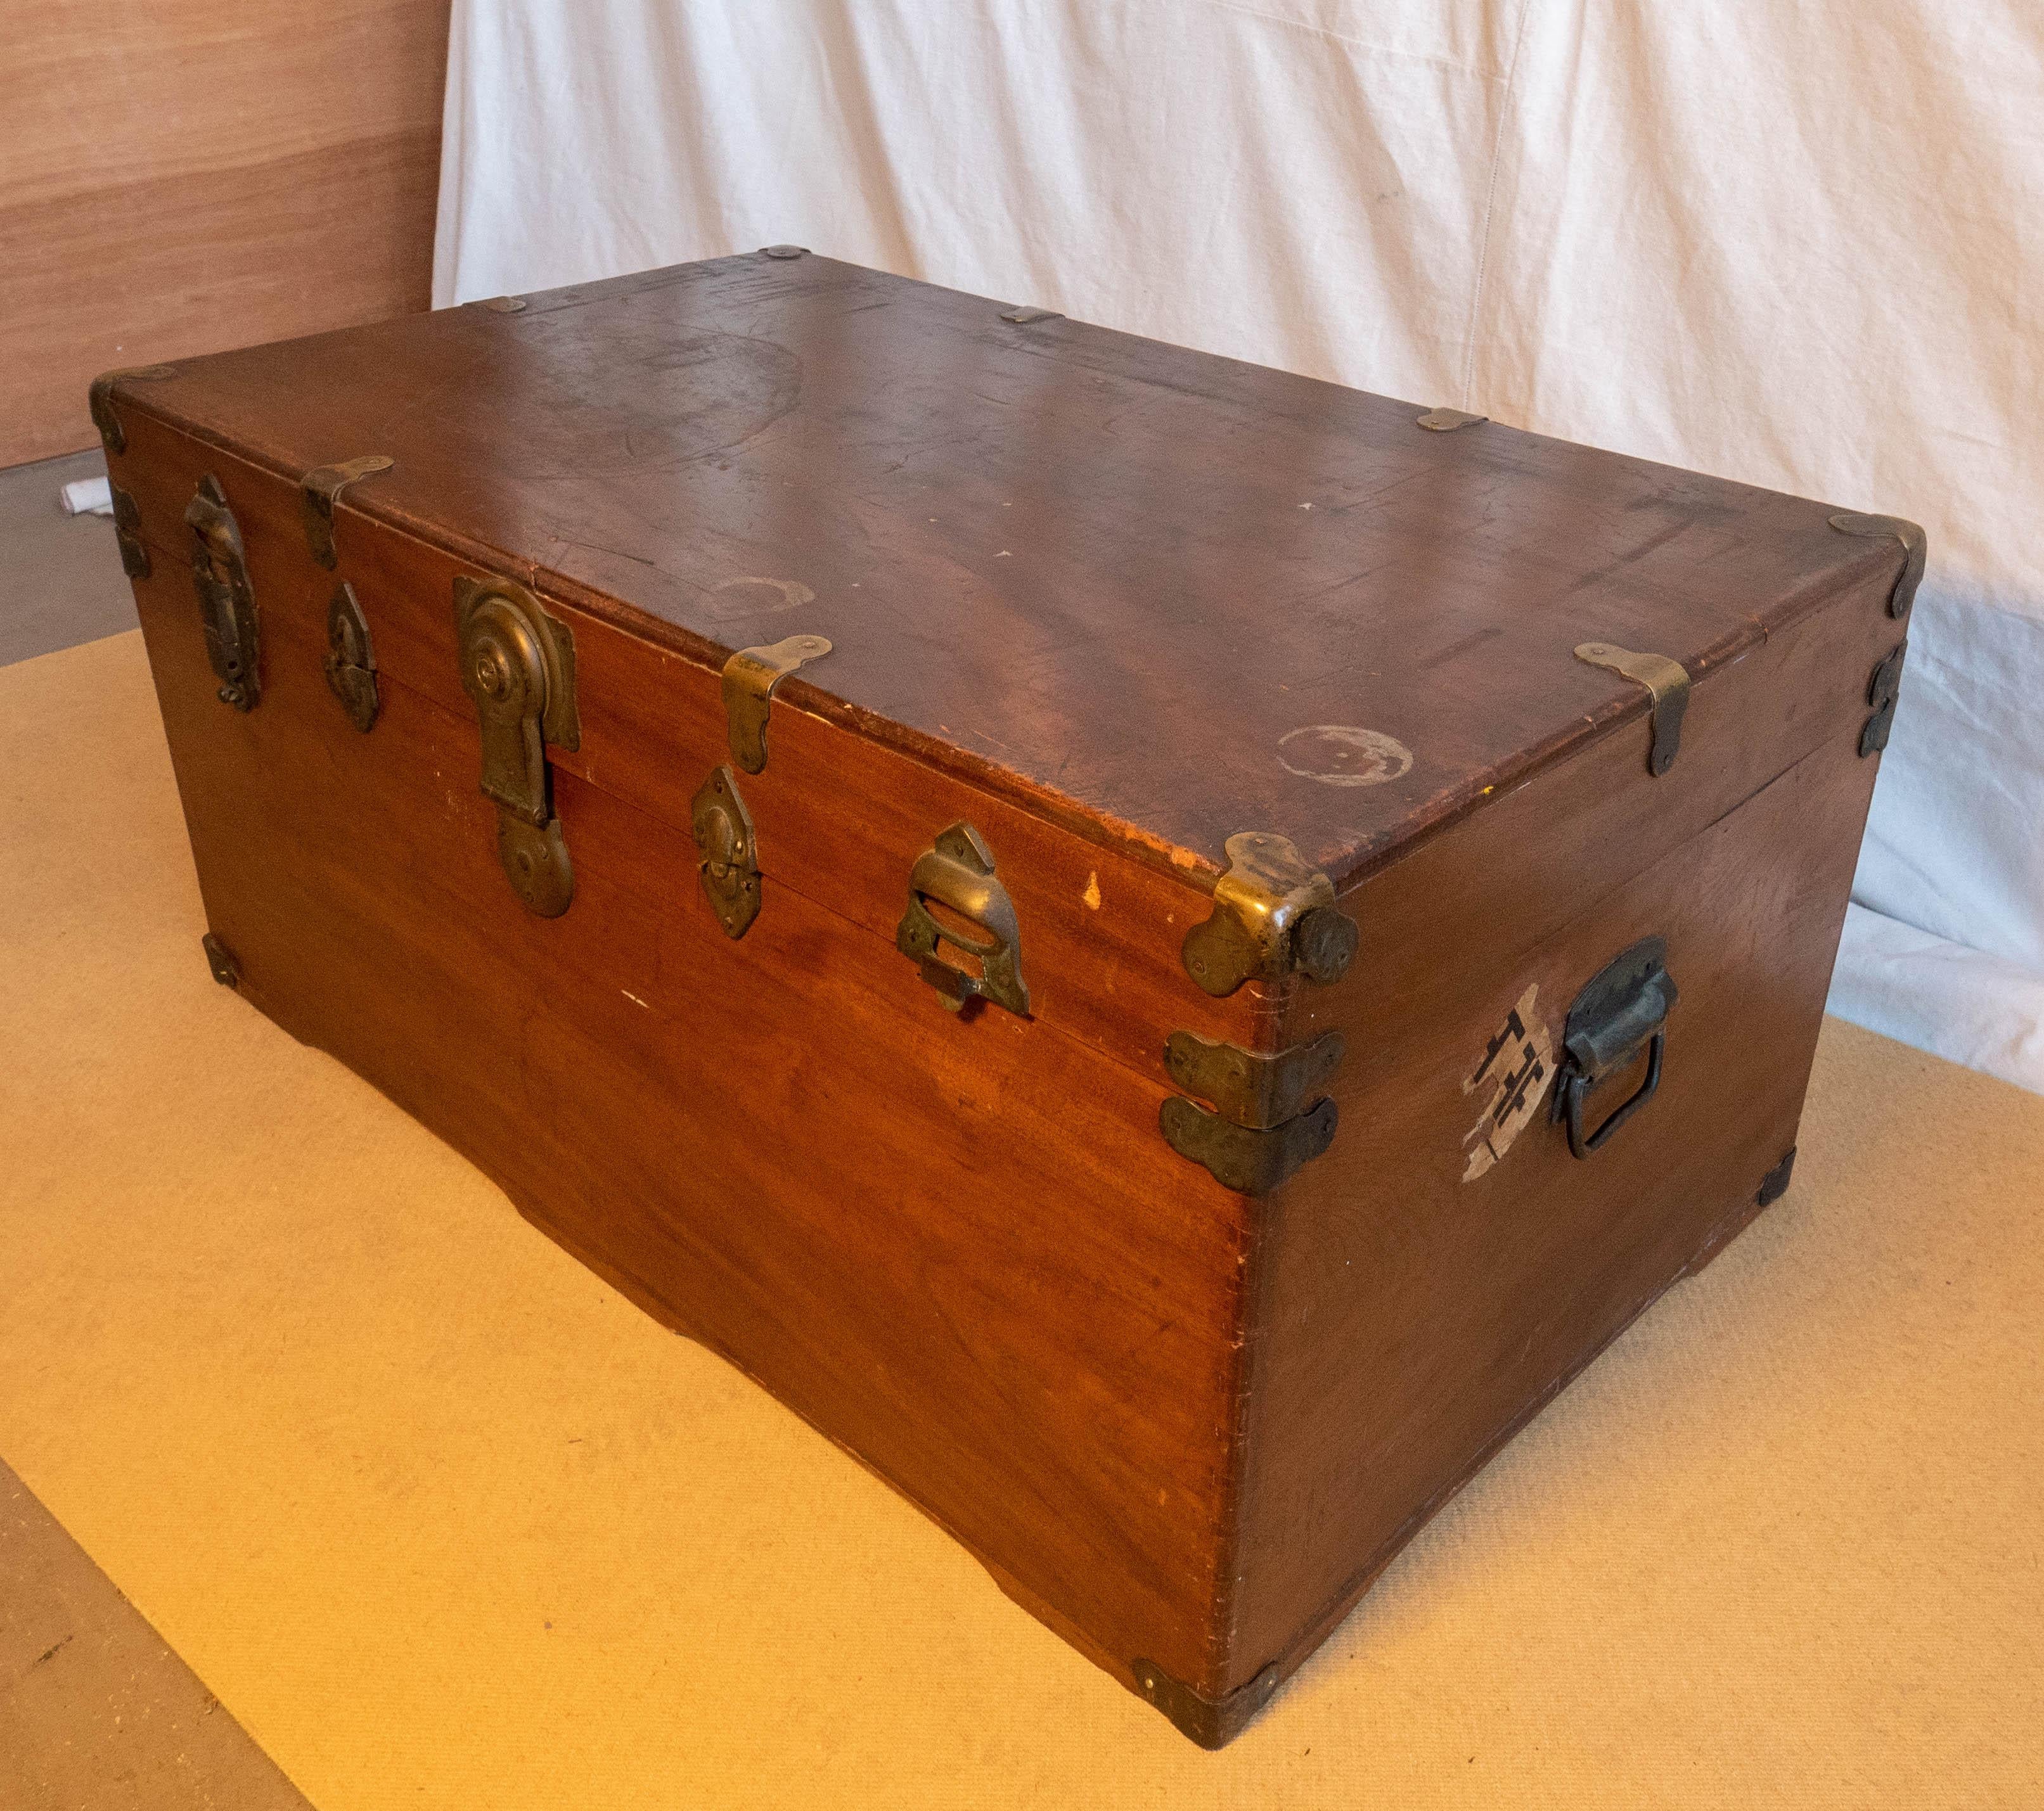 Early 20th century Japanese Camphor Wood Campaign chest, WW I or WW II vintage, a sailor's camphor wood chest with brass binding and clasps, with original key and period decals. It is interesting to see the walls of this chest are much thinner and